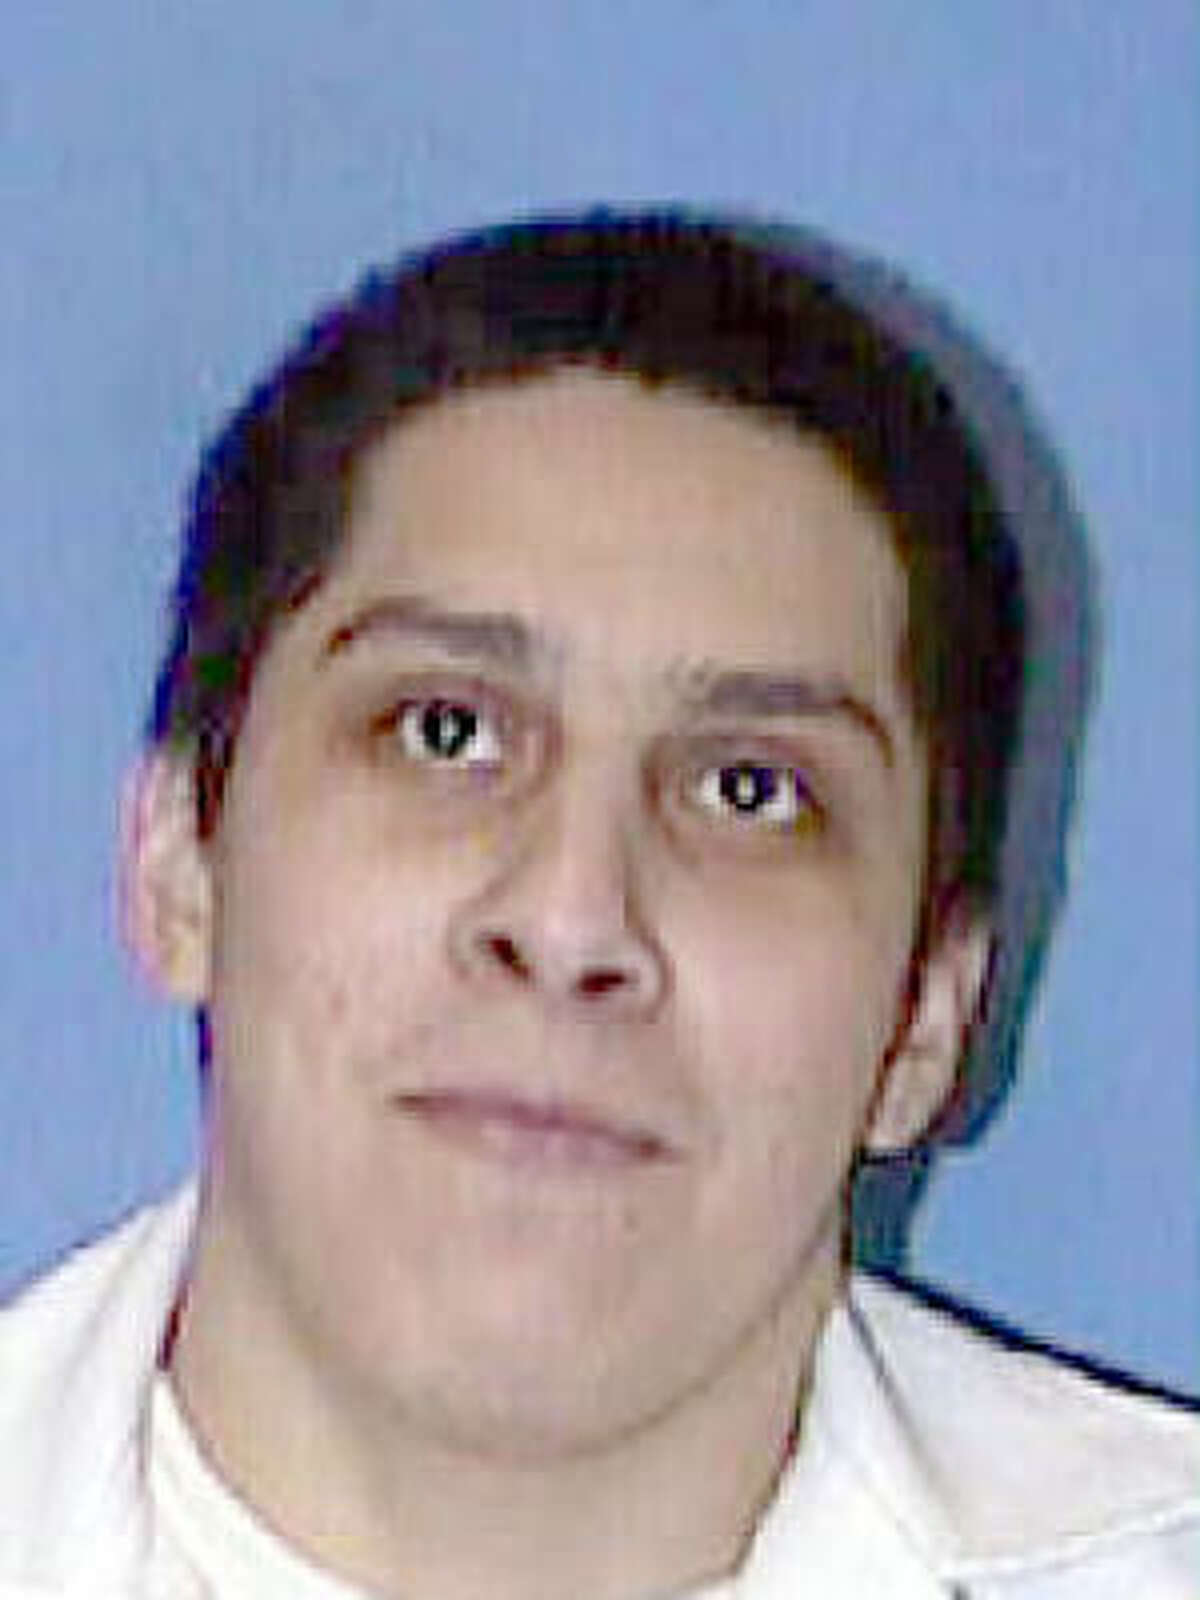 This undated photo released by the Texas Department of Criminal Justice shows death row inmate Jose Medellin.